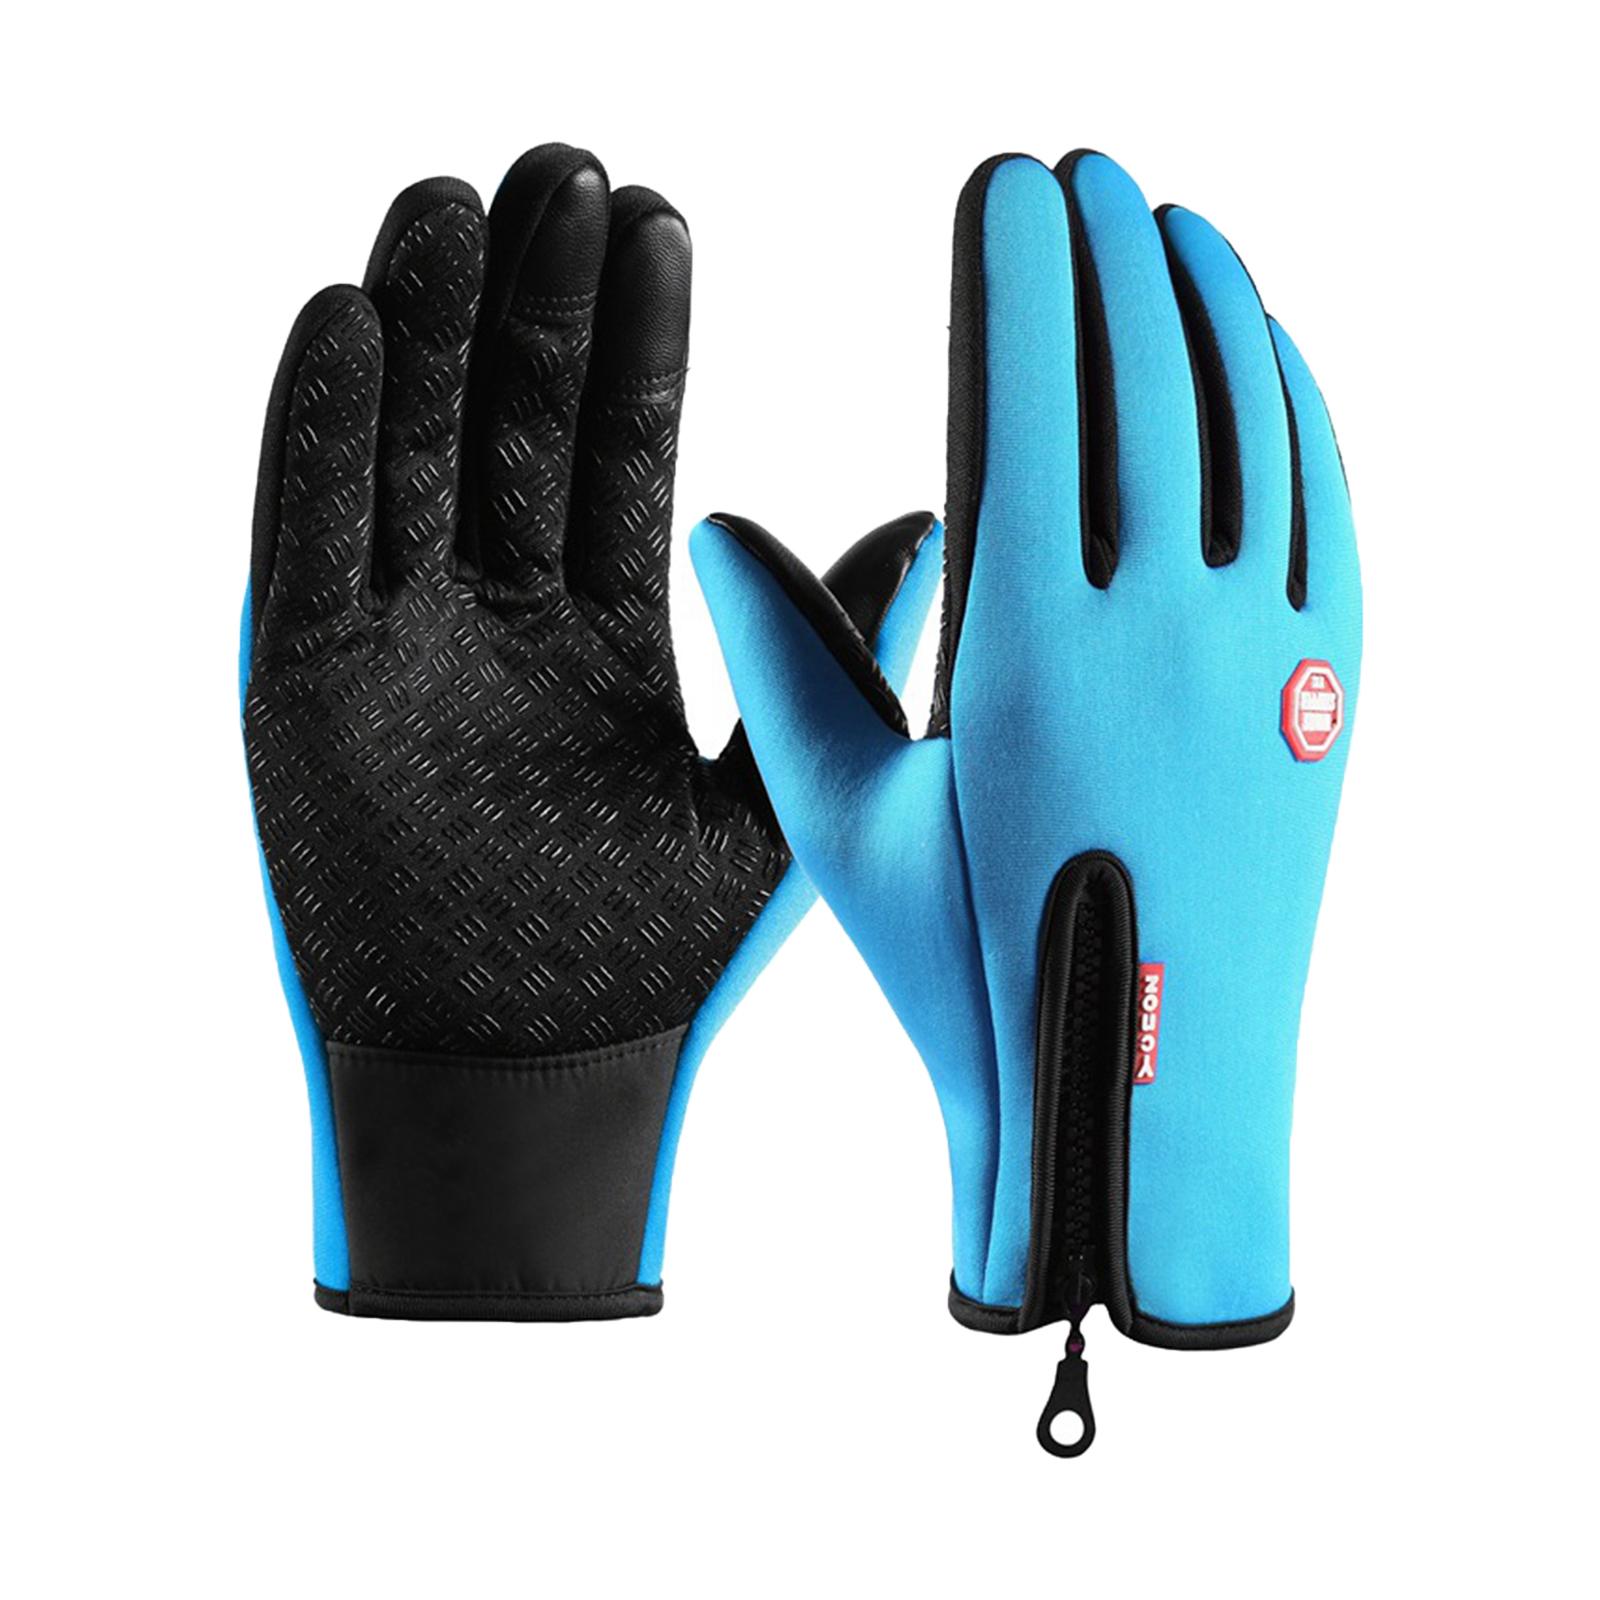 Winter Gloves Windproof Insulated for Motorcycle Cycling Adults Unisex M Blue